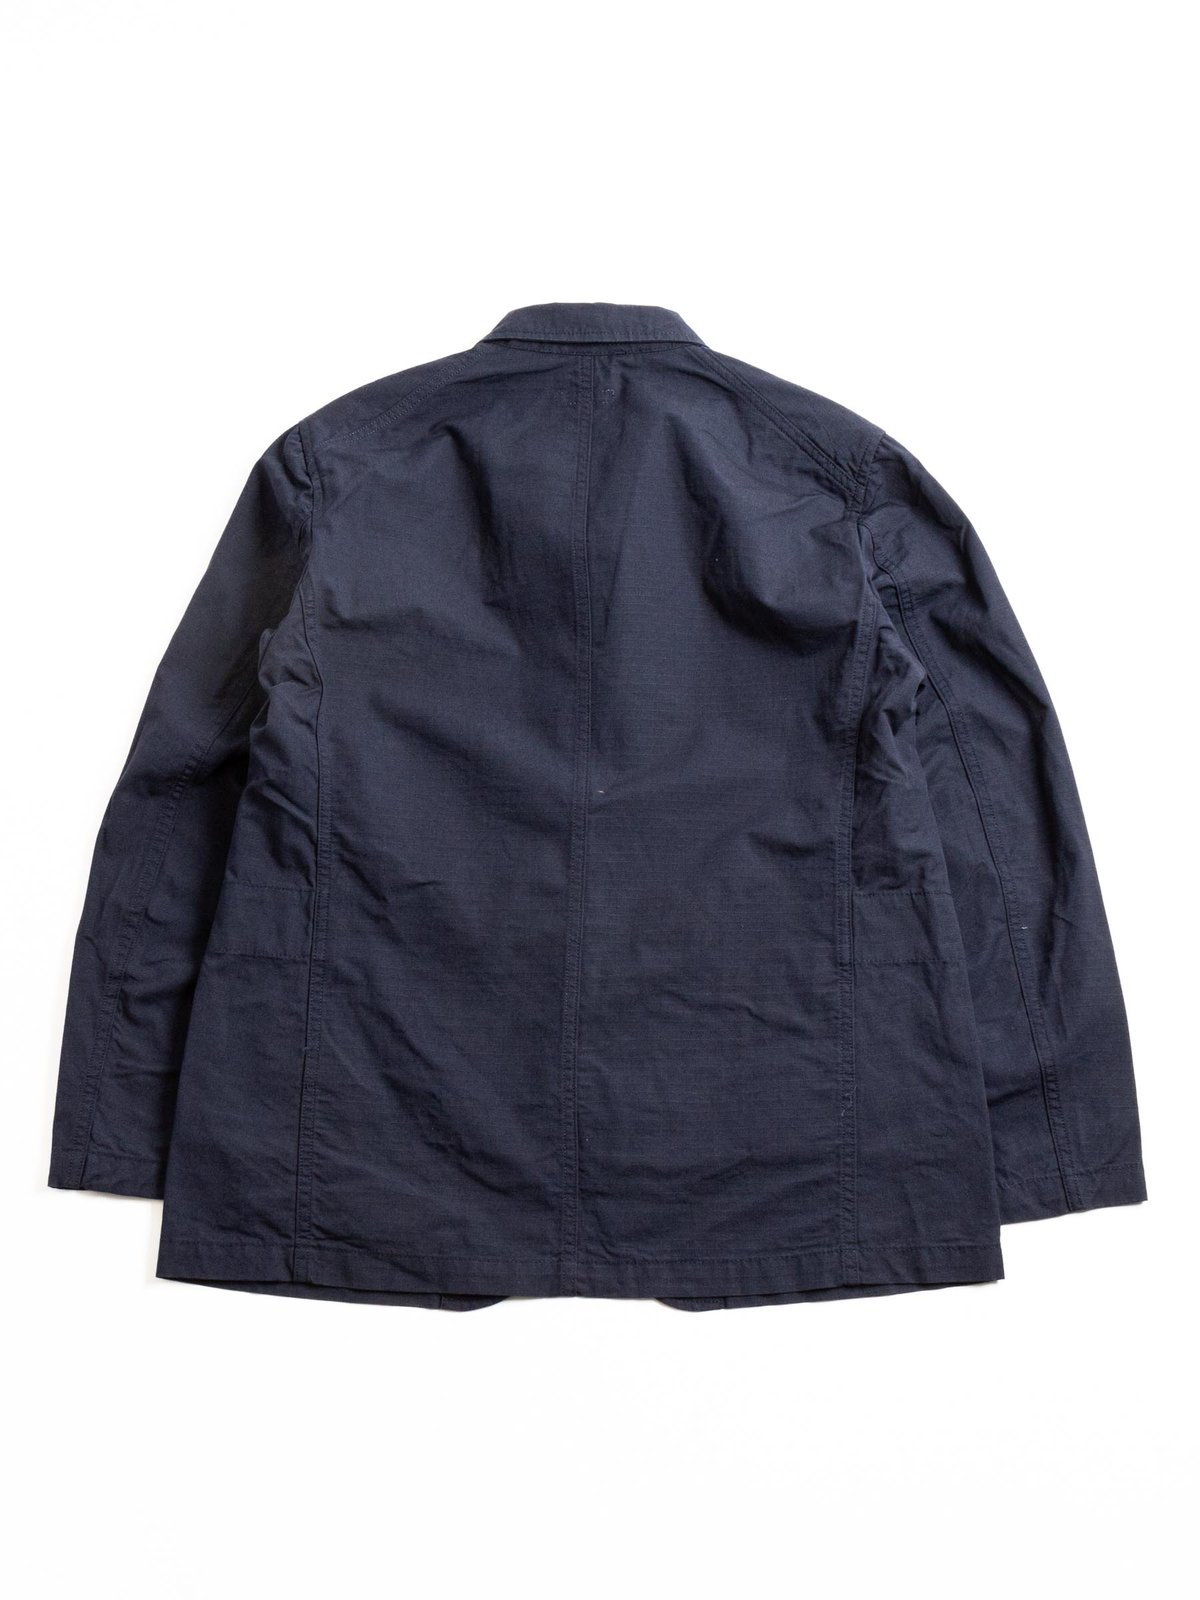 BEDFORD JACKET NAVY COTTON RIPSTOP - Image 4